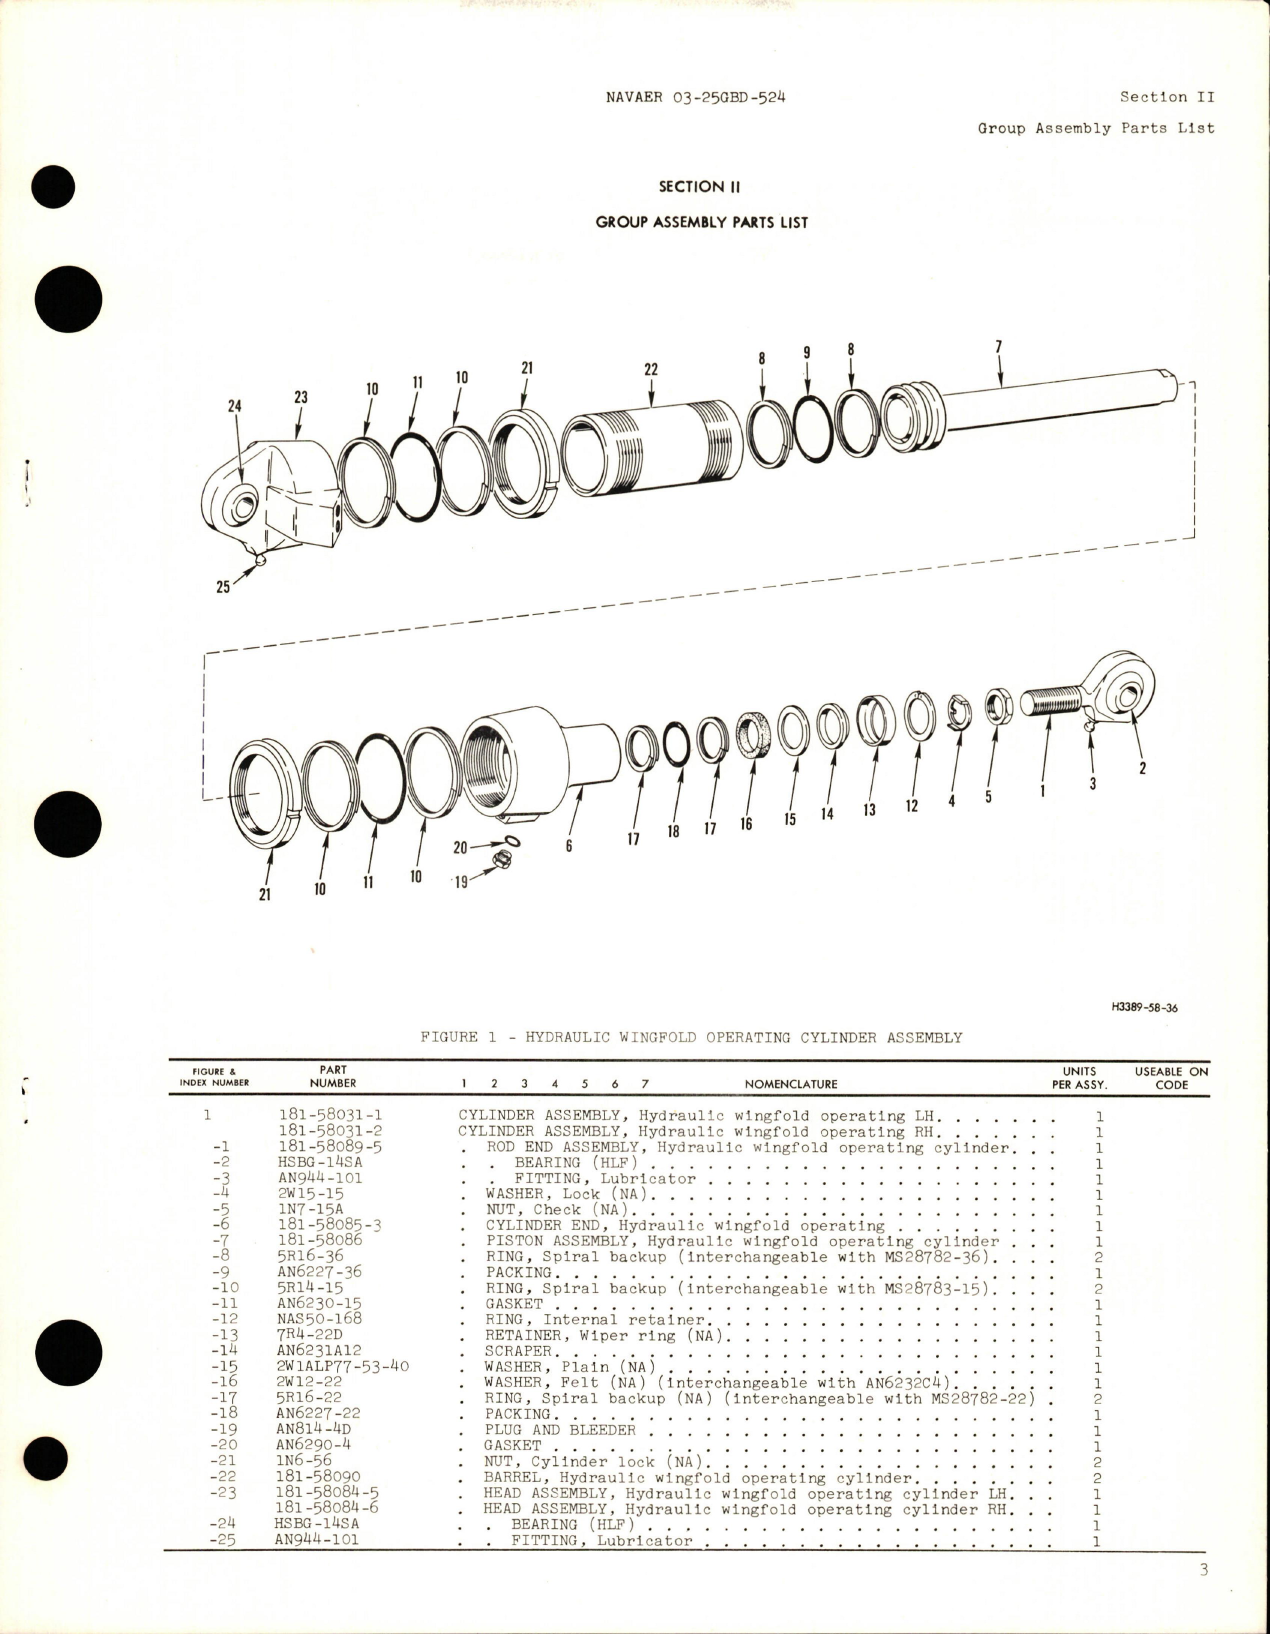 Sample page 5 from AirCorps Library document: Illustrated Parts Breakdown for Hydraulic Wing Fold Operating Cylinder Assembly - Parts 181-58031-1 and 181-58031-2 